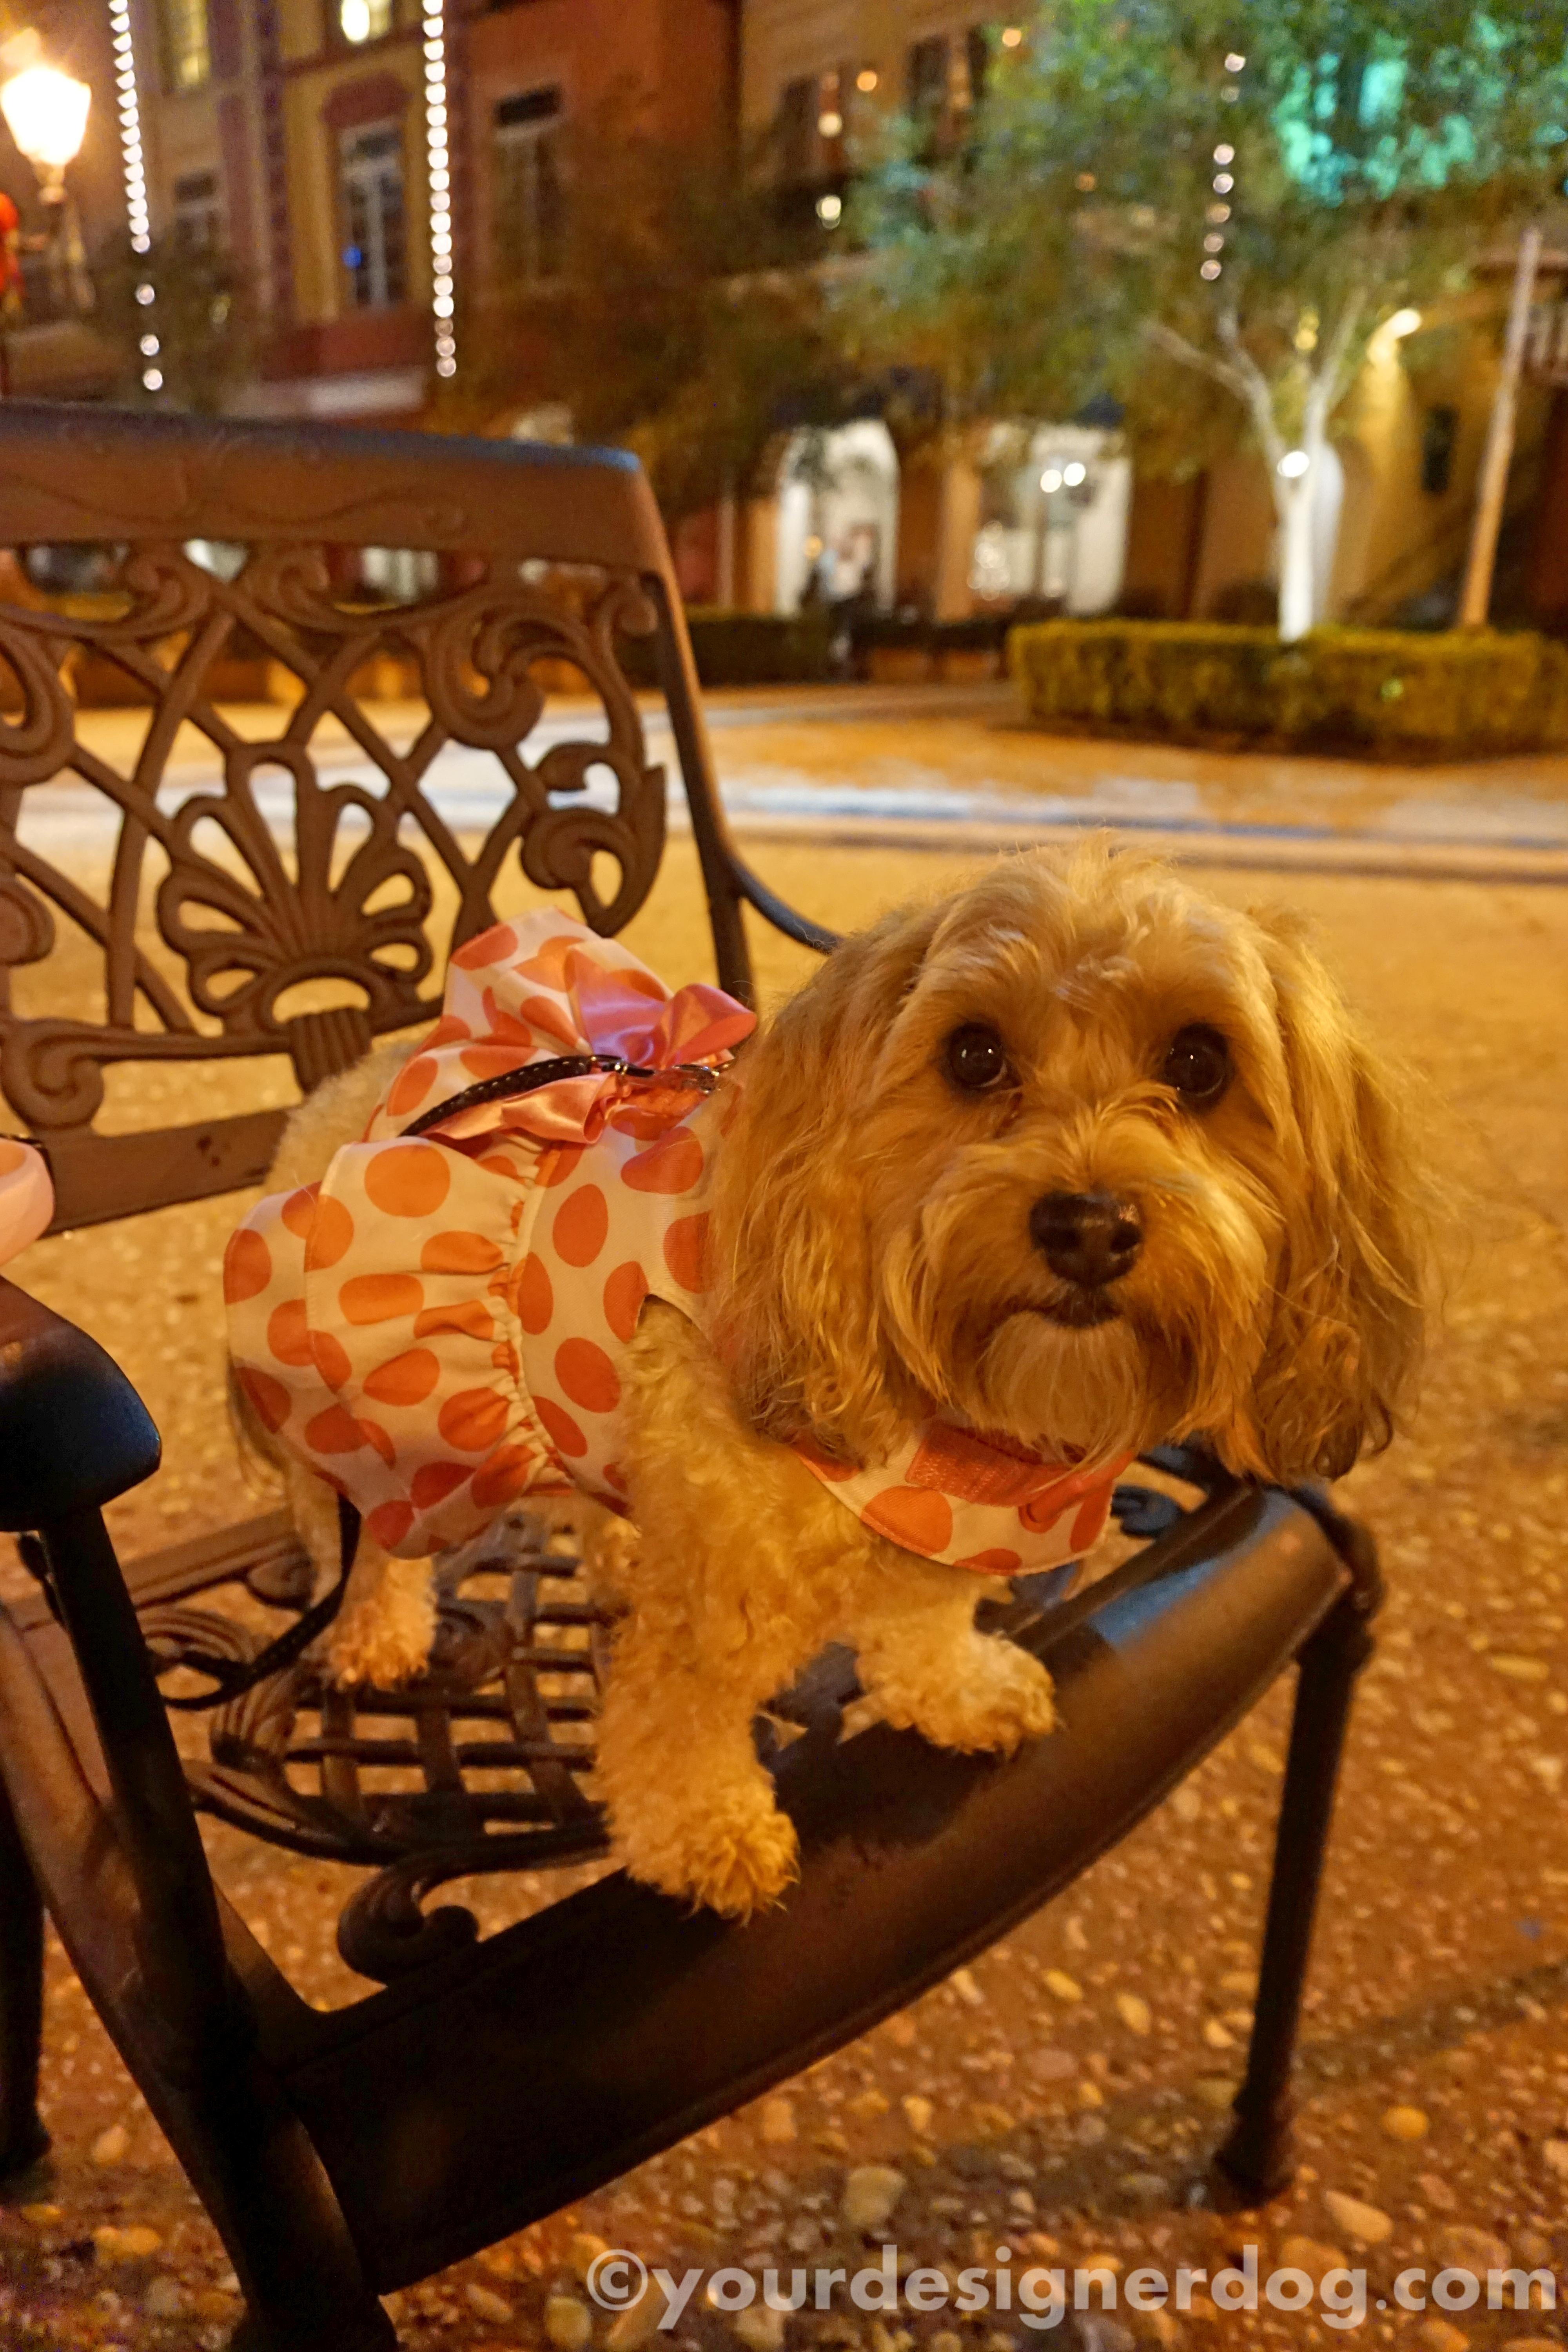 dogs, designer dogs, yorkipoo, yorkie poo, restaurant, dining, outdoors